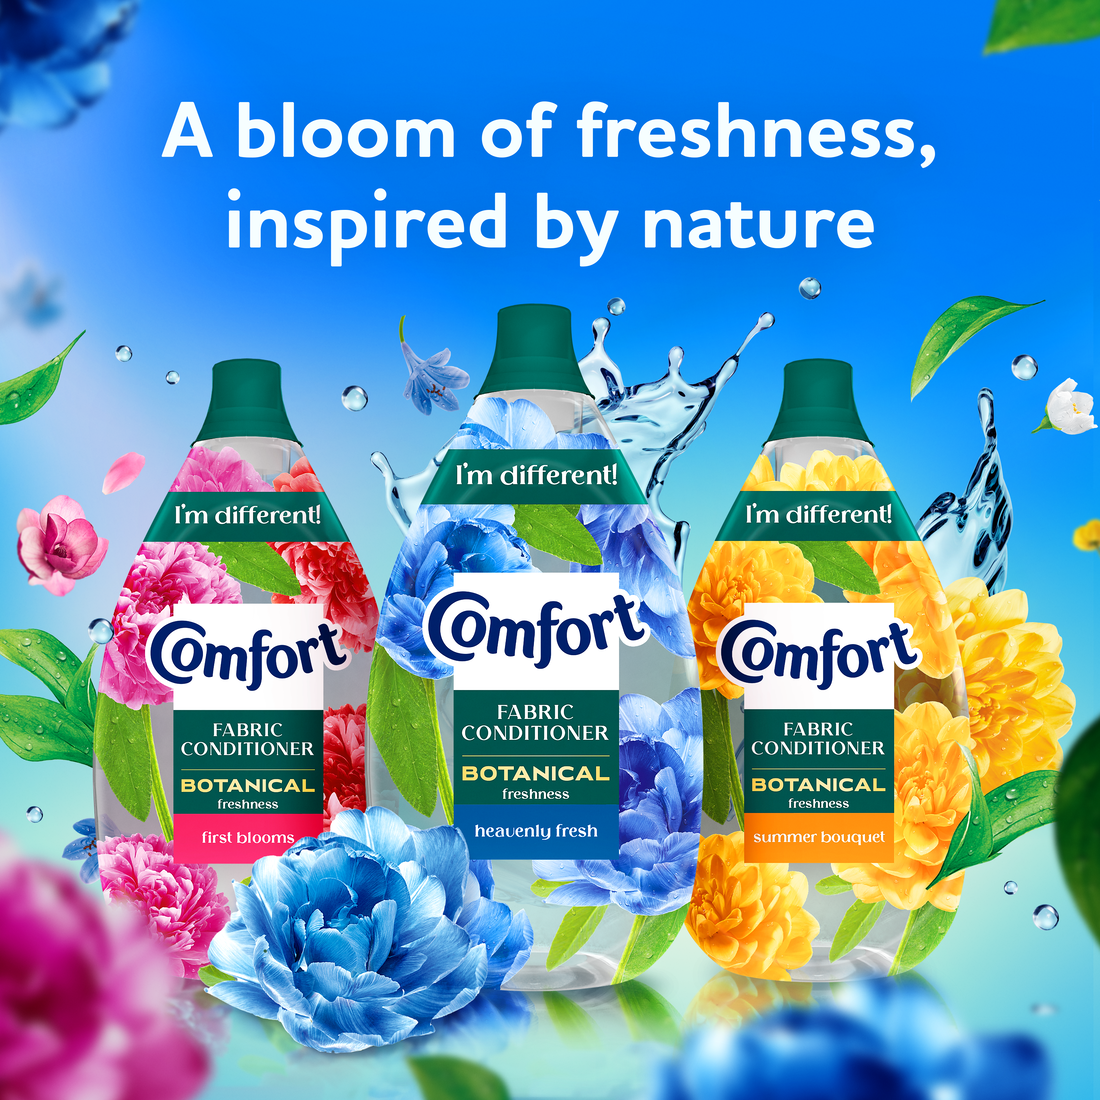 A bloom of freshness, inspired by nature